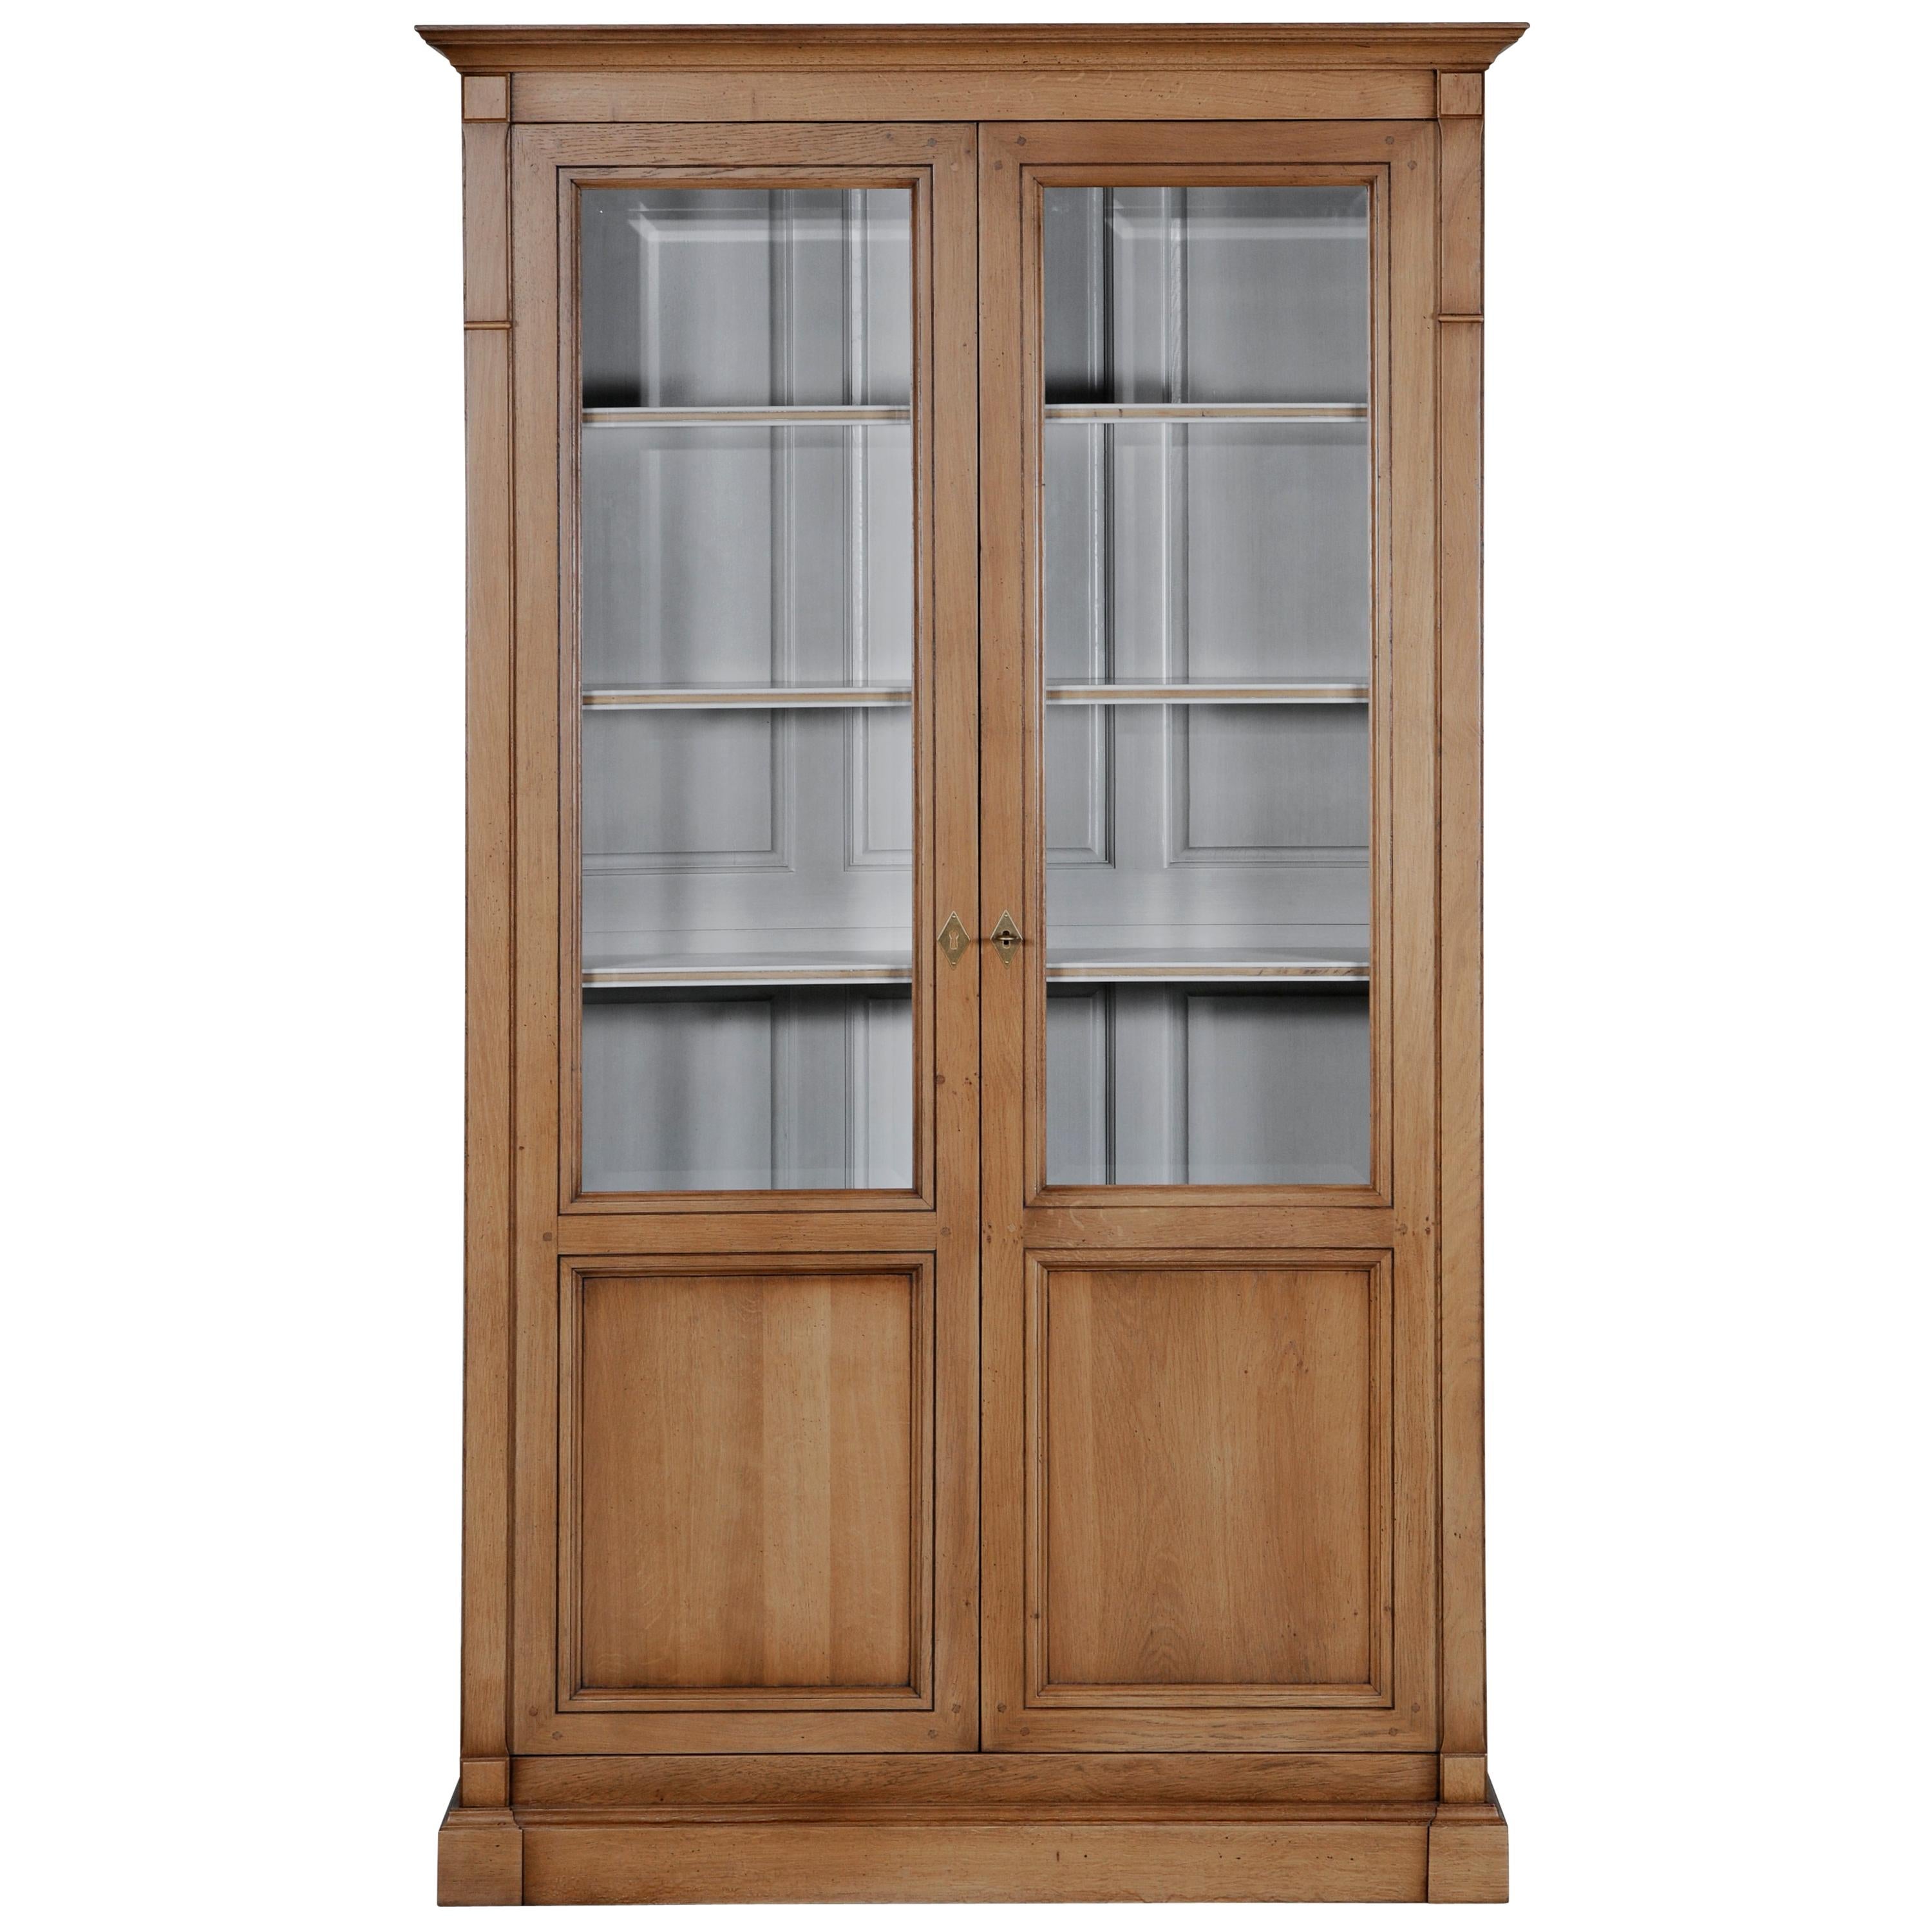 This Vitrine is a handmade reproduction of the French Directoire style at the end of the 18th century. This period is remarkable with its straight, classical and timeless lines.

The finish is made with a chestnut oak stain for the outside and a